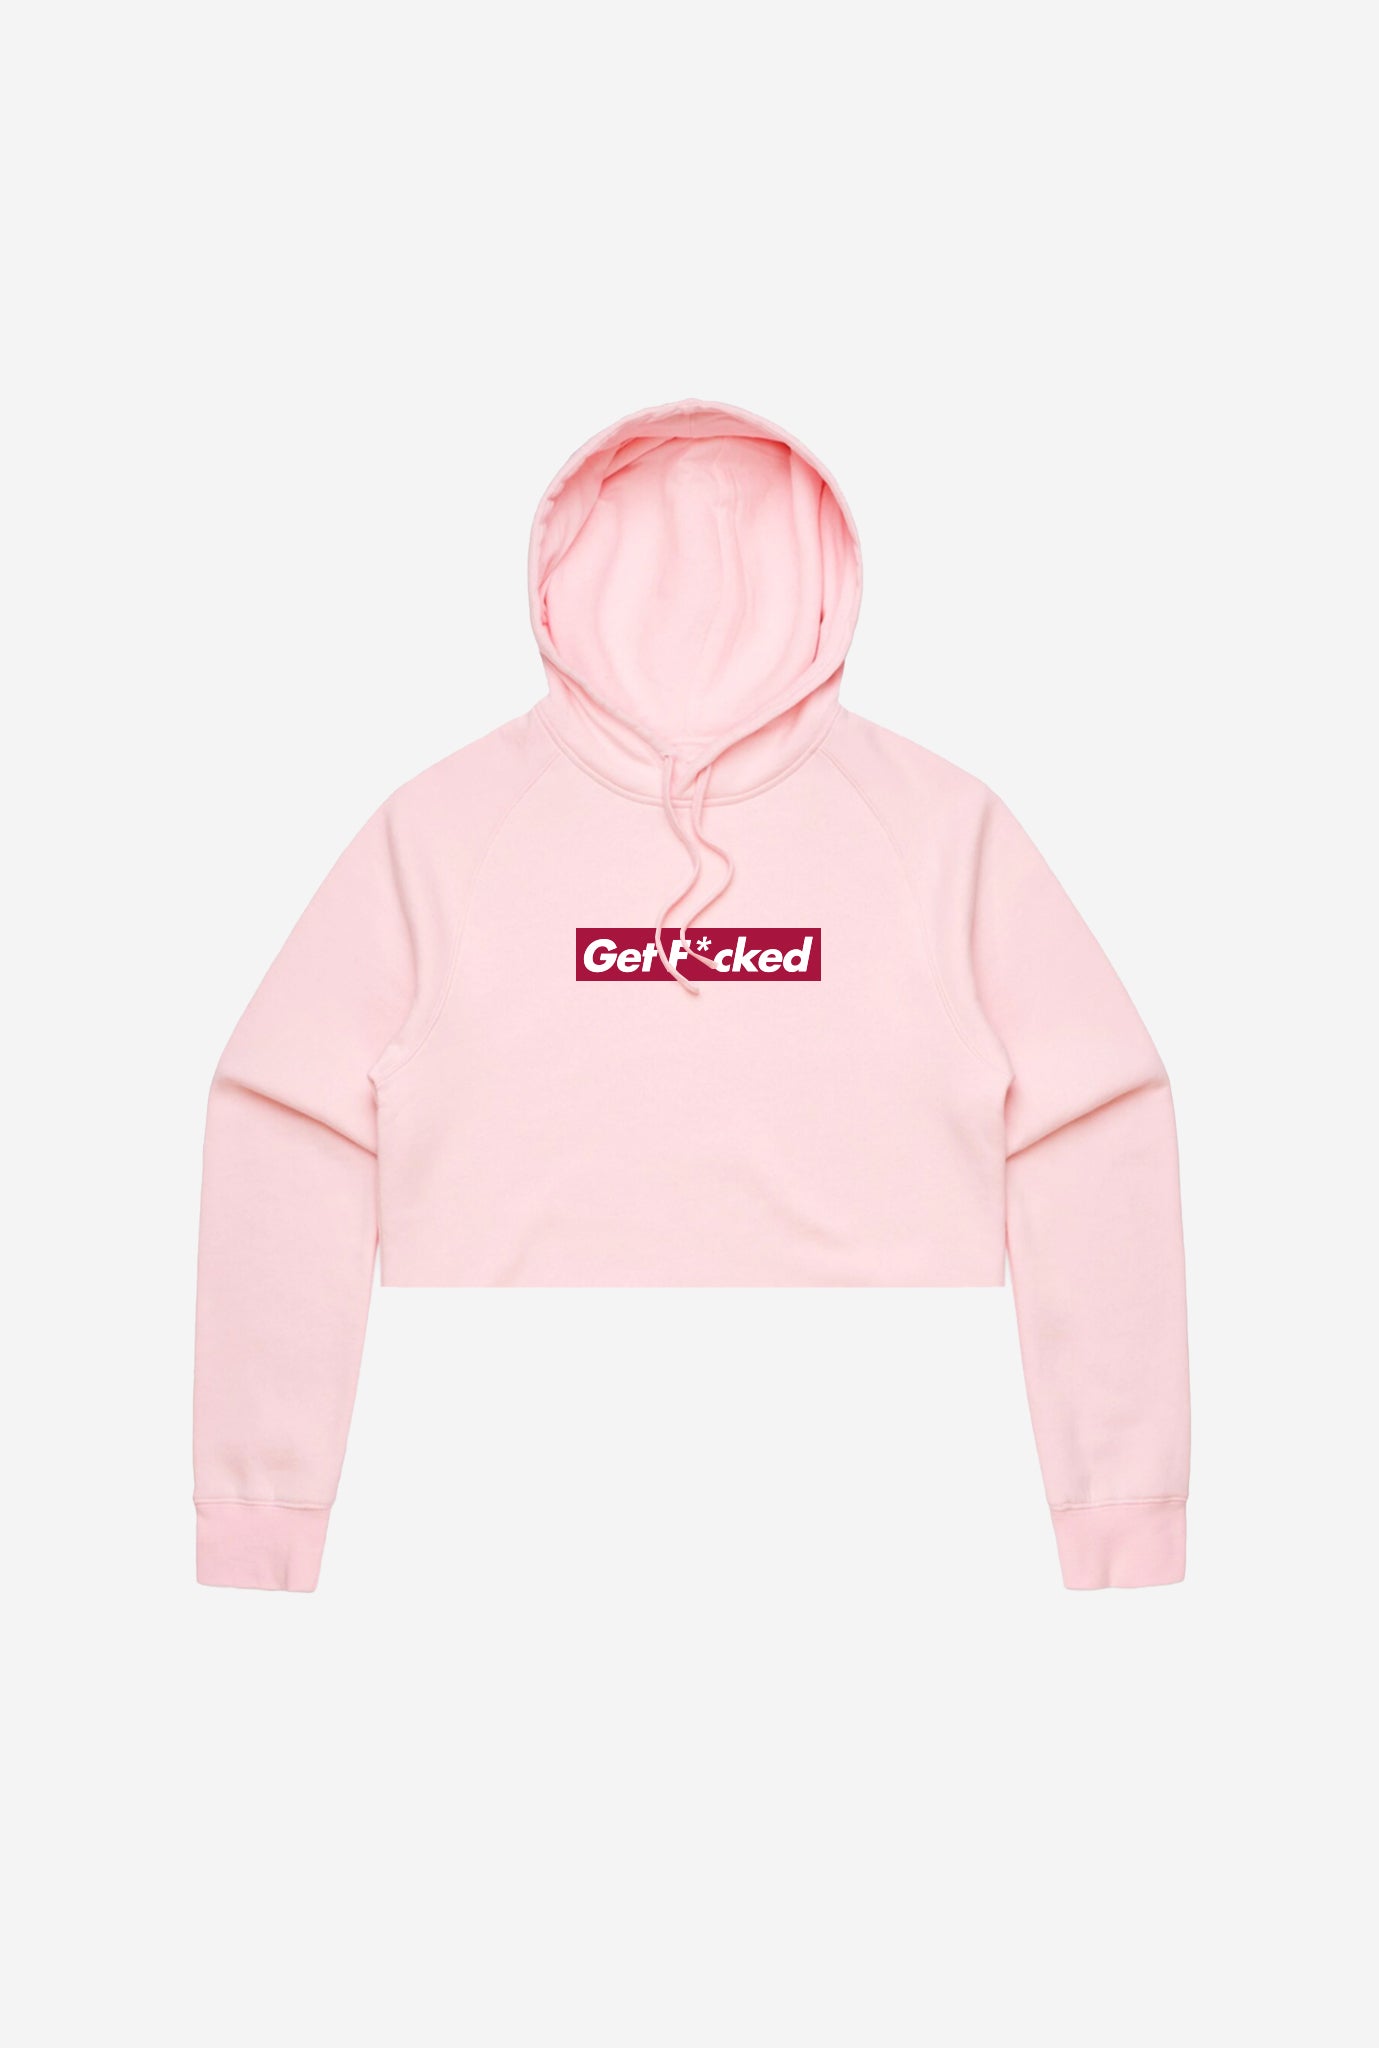 Get Fucked Box Logo Cropped Hoodie - Pink